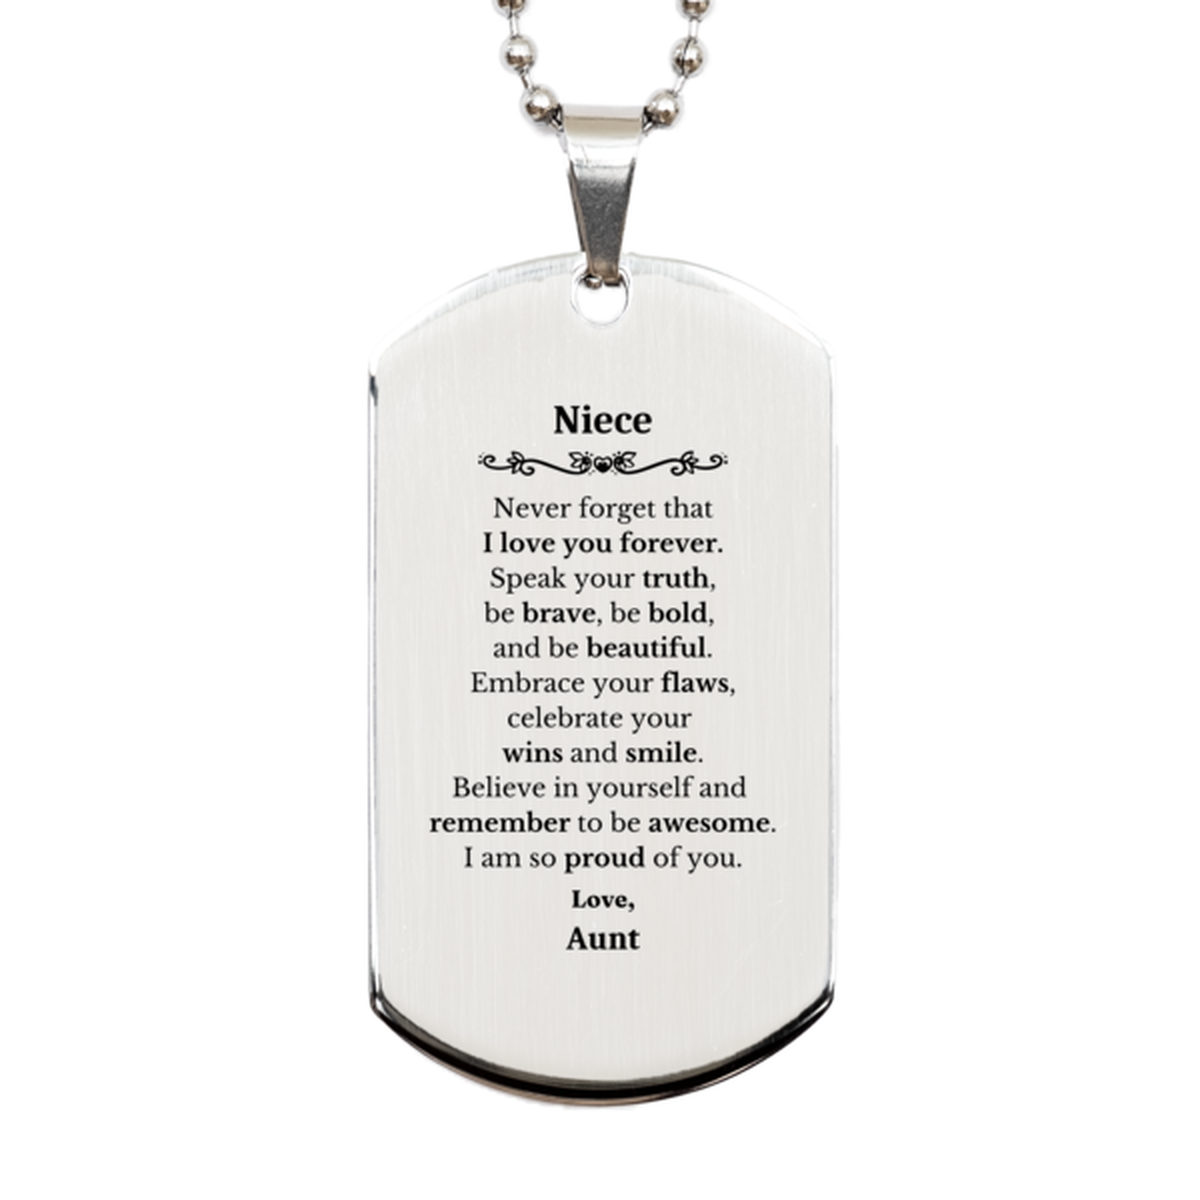 Niece Silver Dog Tag, Never forget that I love you forever, Inspirational Niece Birthday Unique Gifts From Aunt